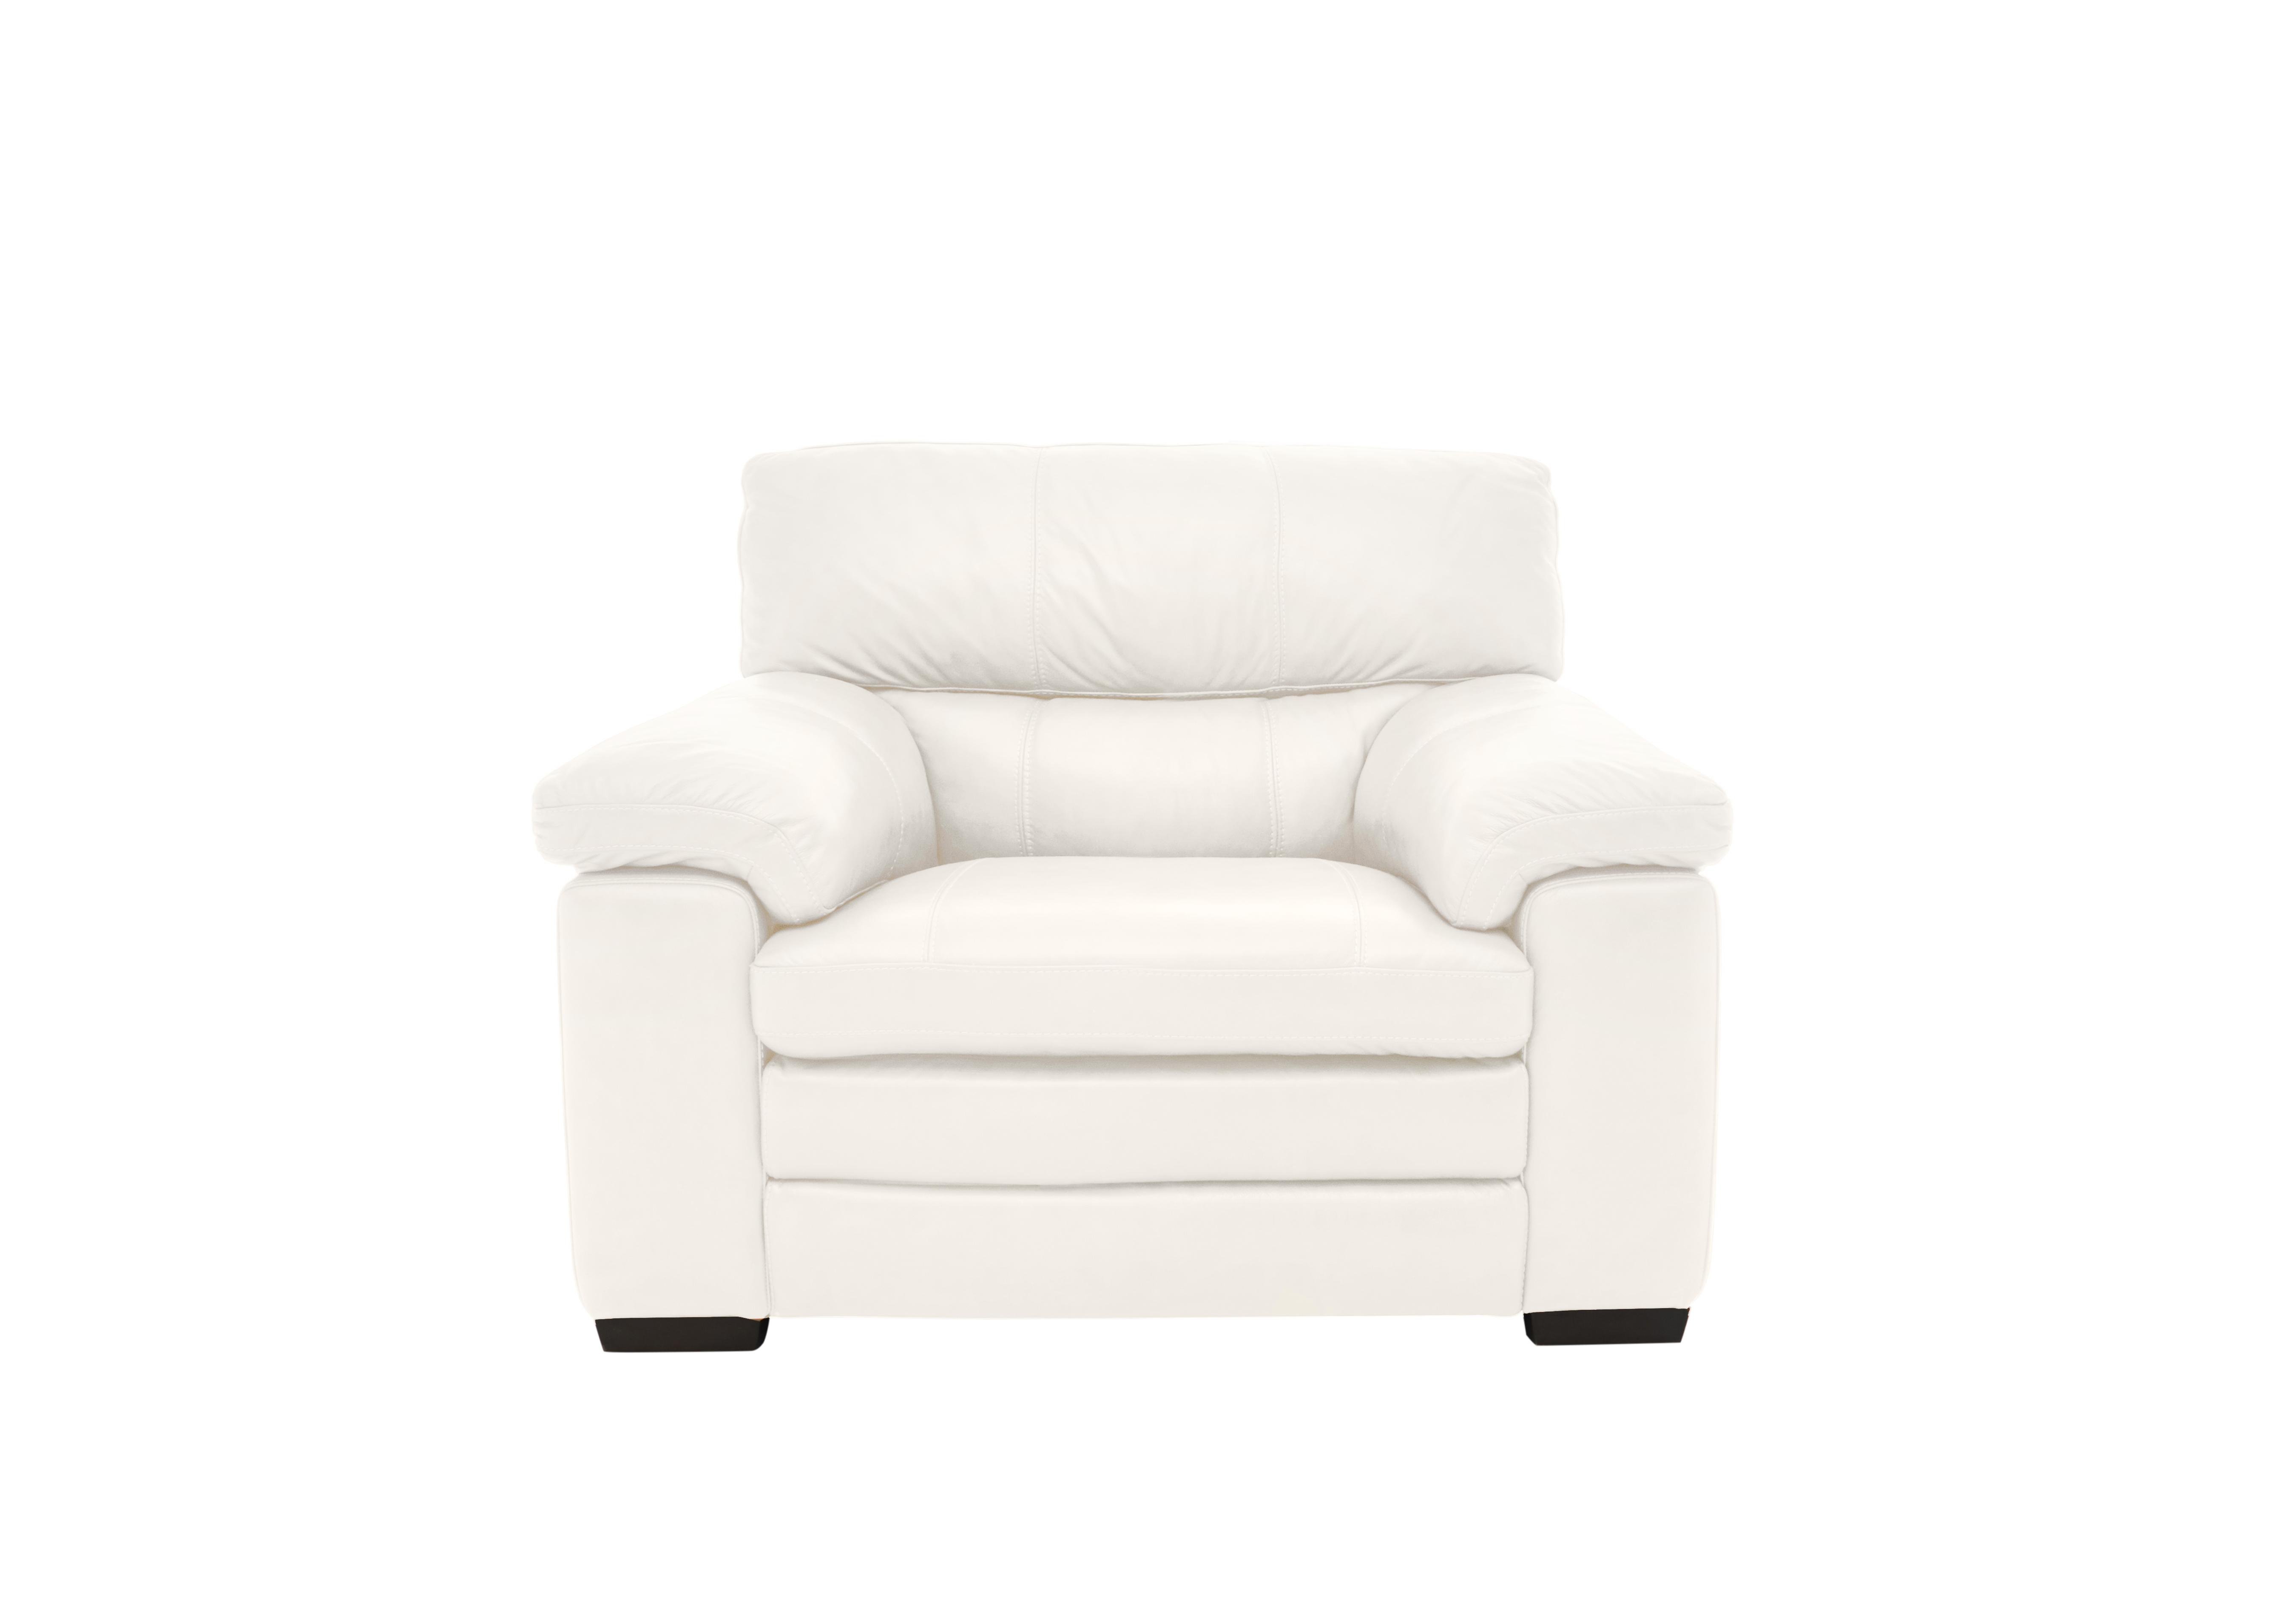 Cozee Leather Armchair in Bv-744d Star White on Furniture Village